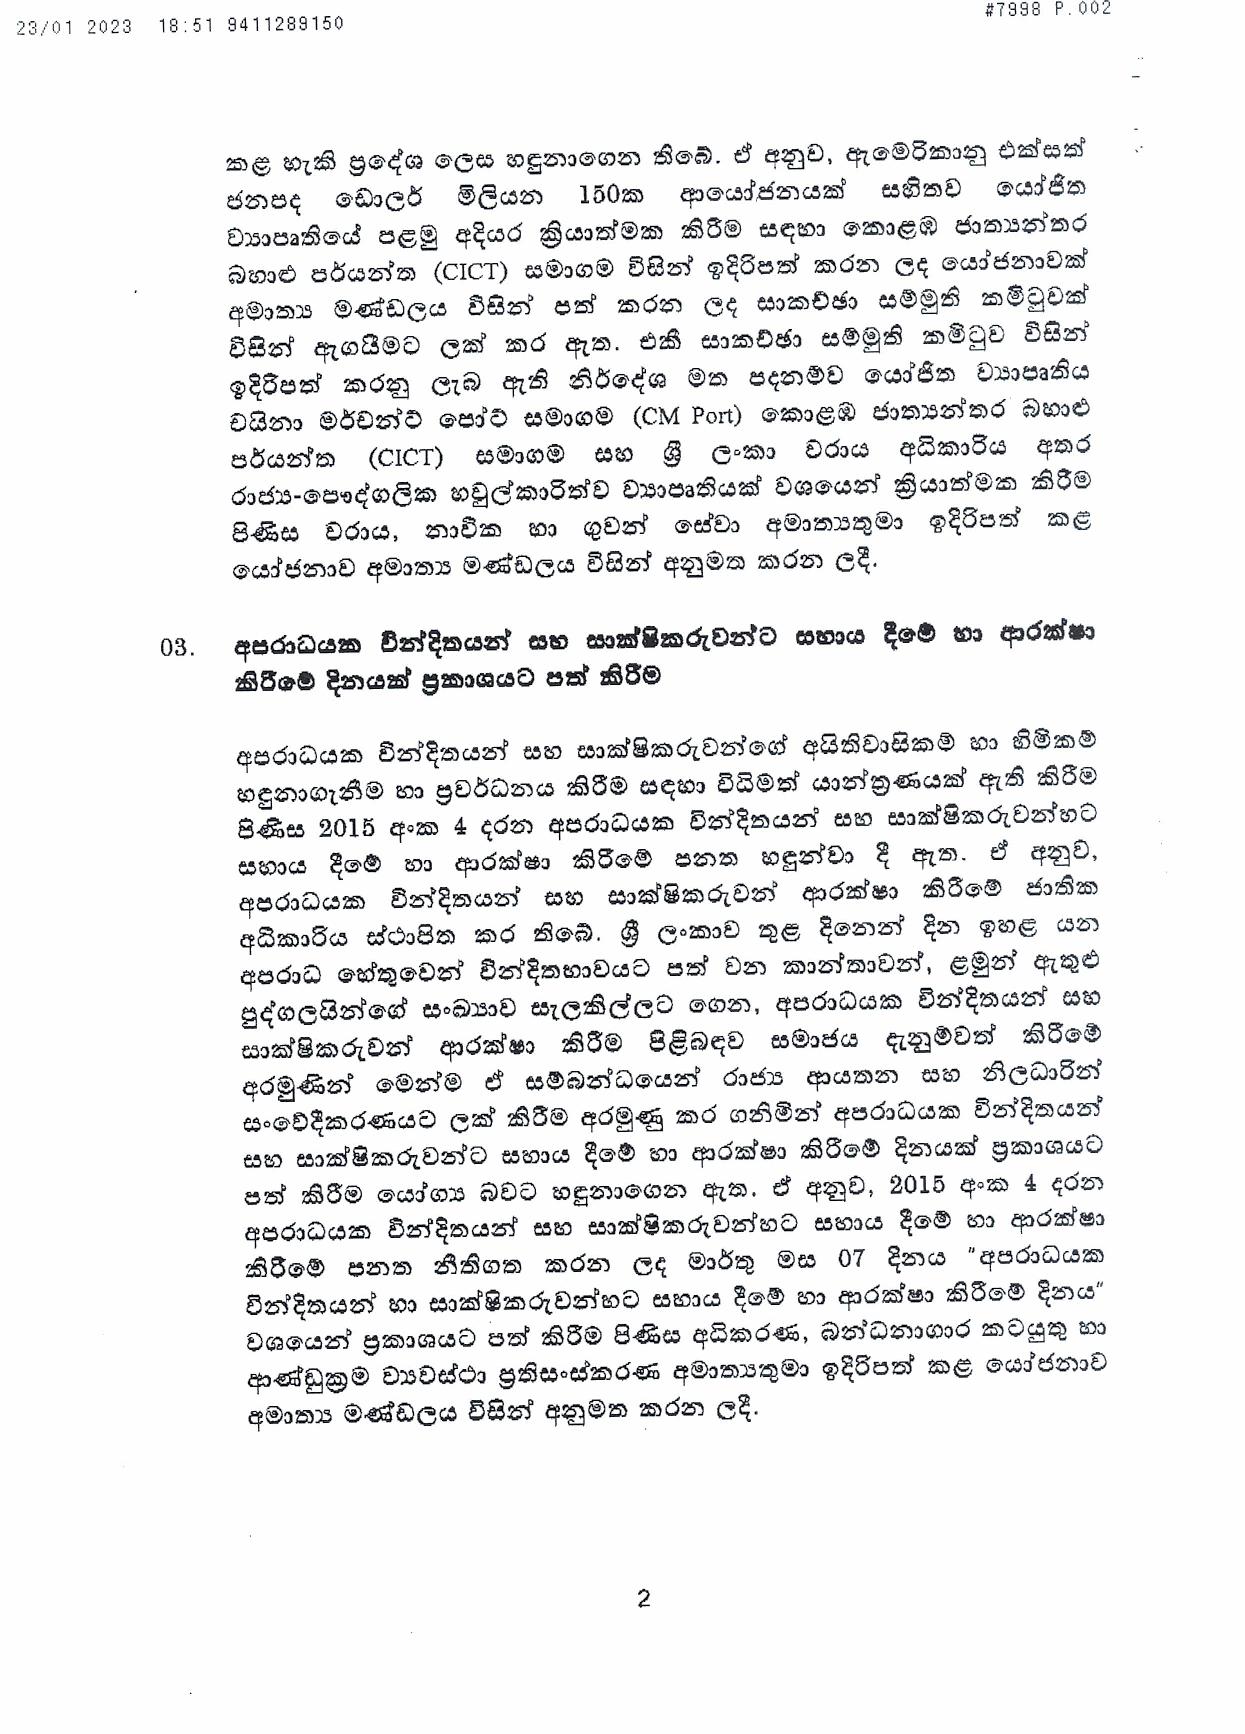 Cabinet Decision on 23.01.2023 page 002